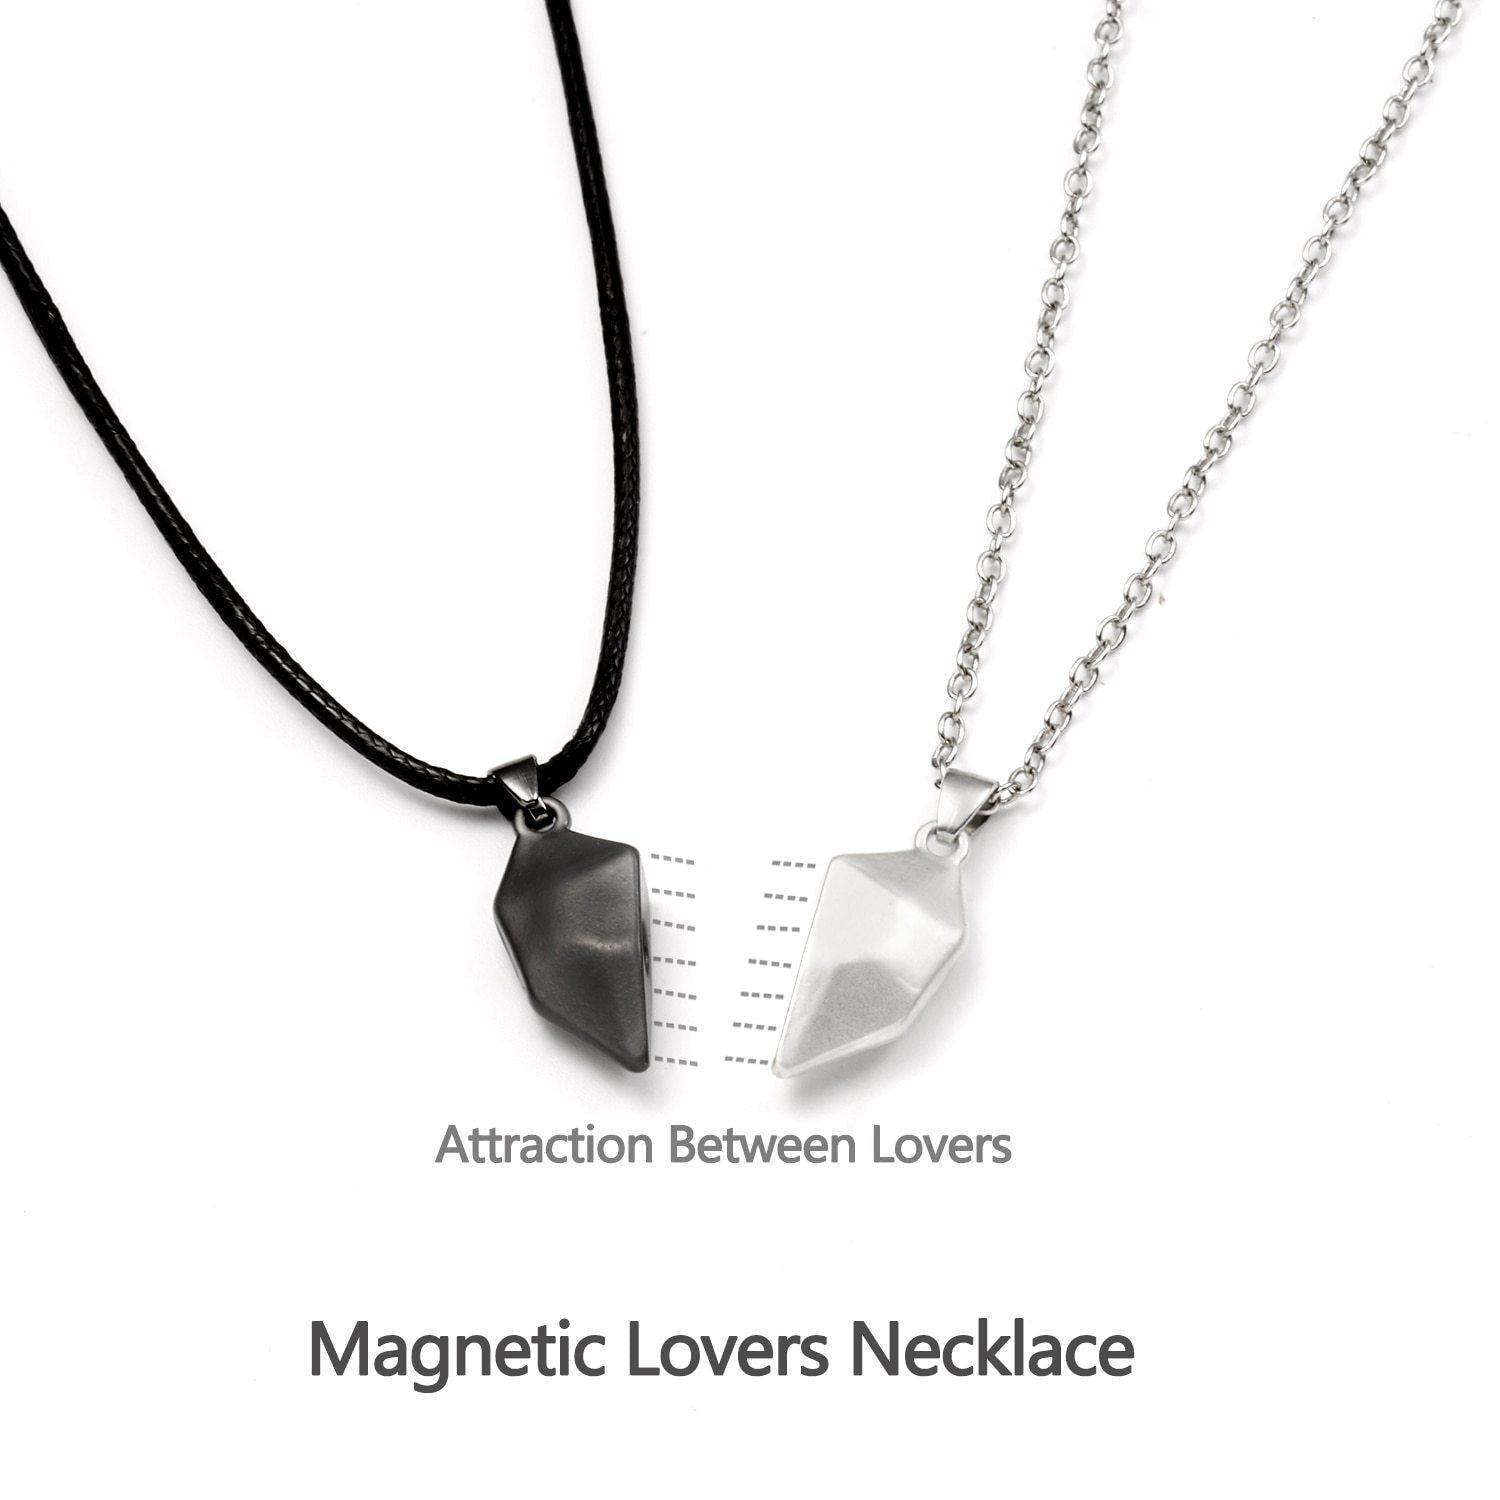 Magnetic Connecting Best Friend Necklace For Bestie for Christmas 2023 | Magnetic Connecting Best Friend Necklace For Bestie - undefined | best friend necklace for 2, best friend necklaces magnetic, Friendship Pendant Necklaces, gift ideas for Best Friends, Magnetic Friendship necklace, Magnetic heart Necklace, To My Best Friend Friendship Gift Necklace Set | From Hunny Life | hunnylife.com